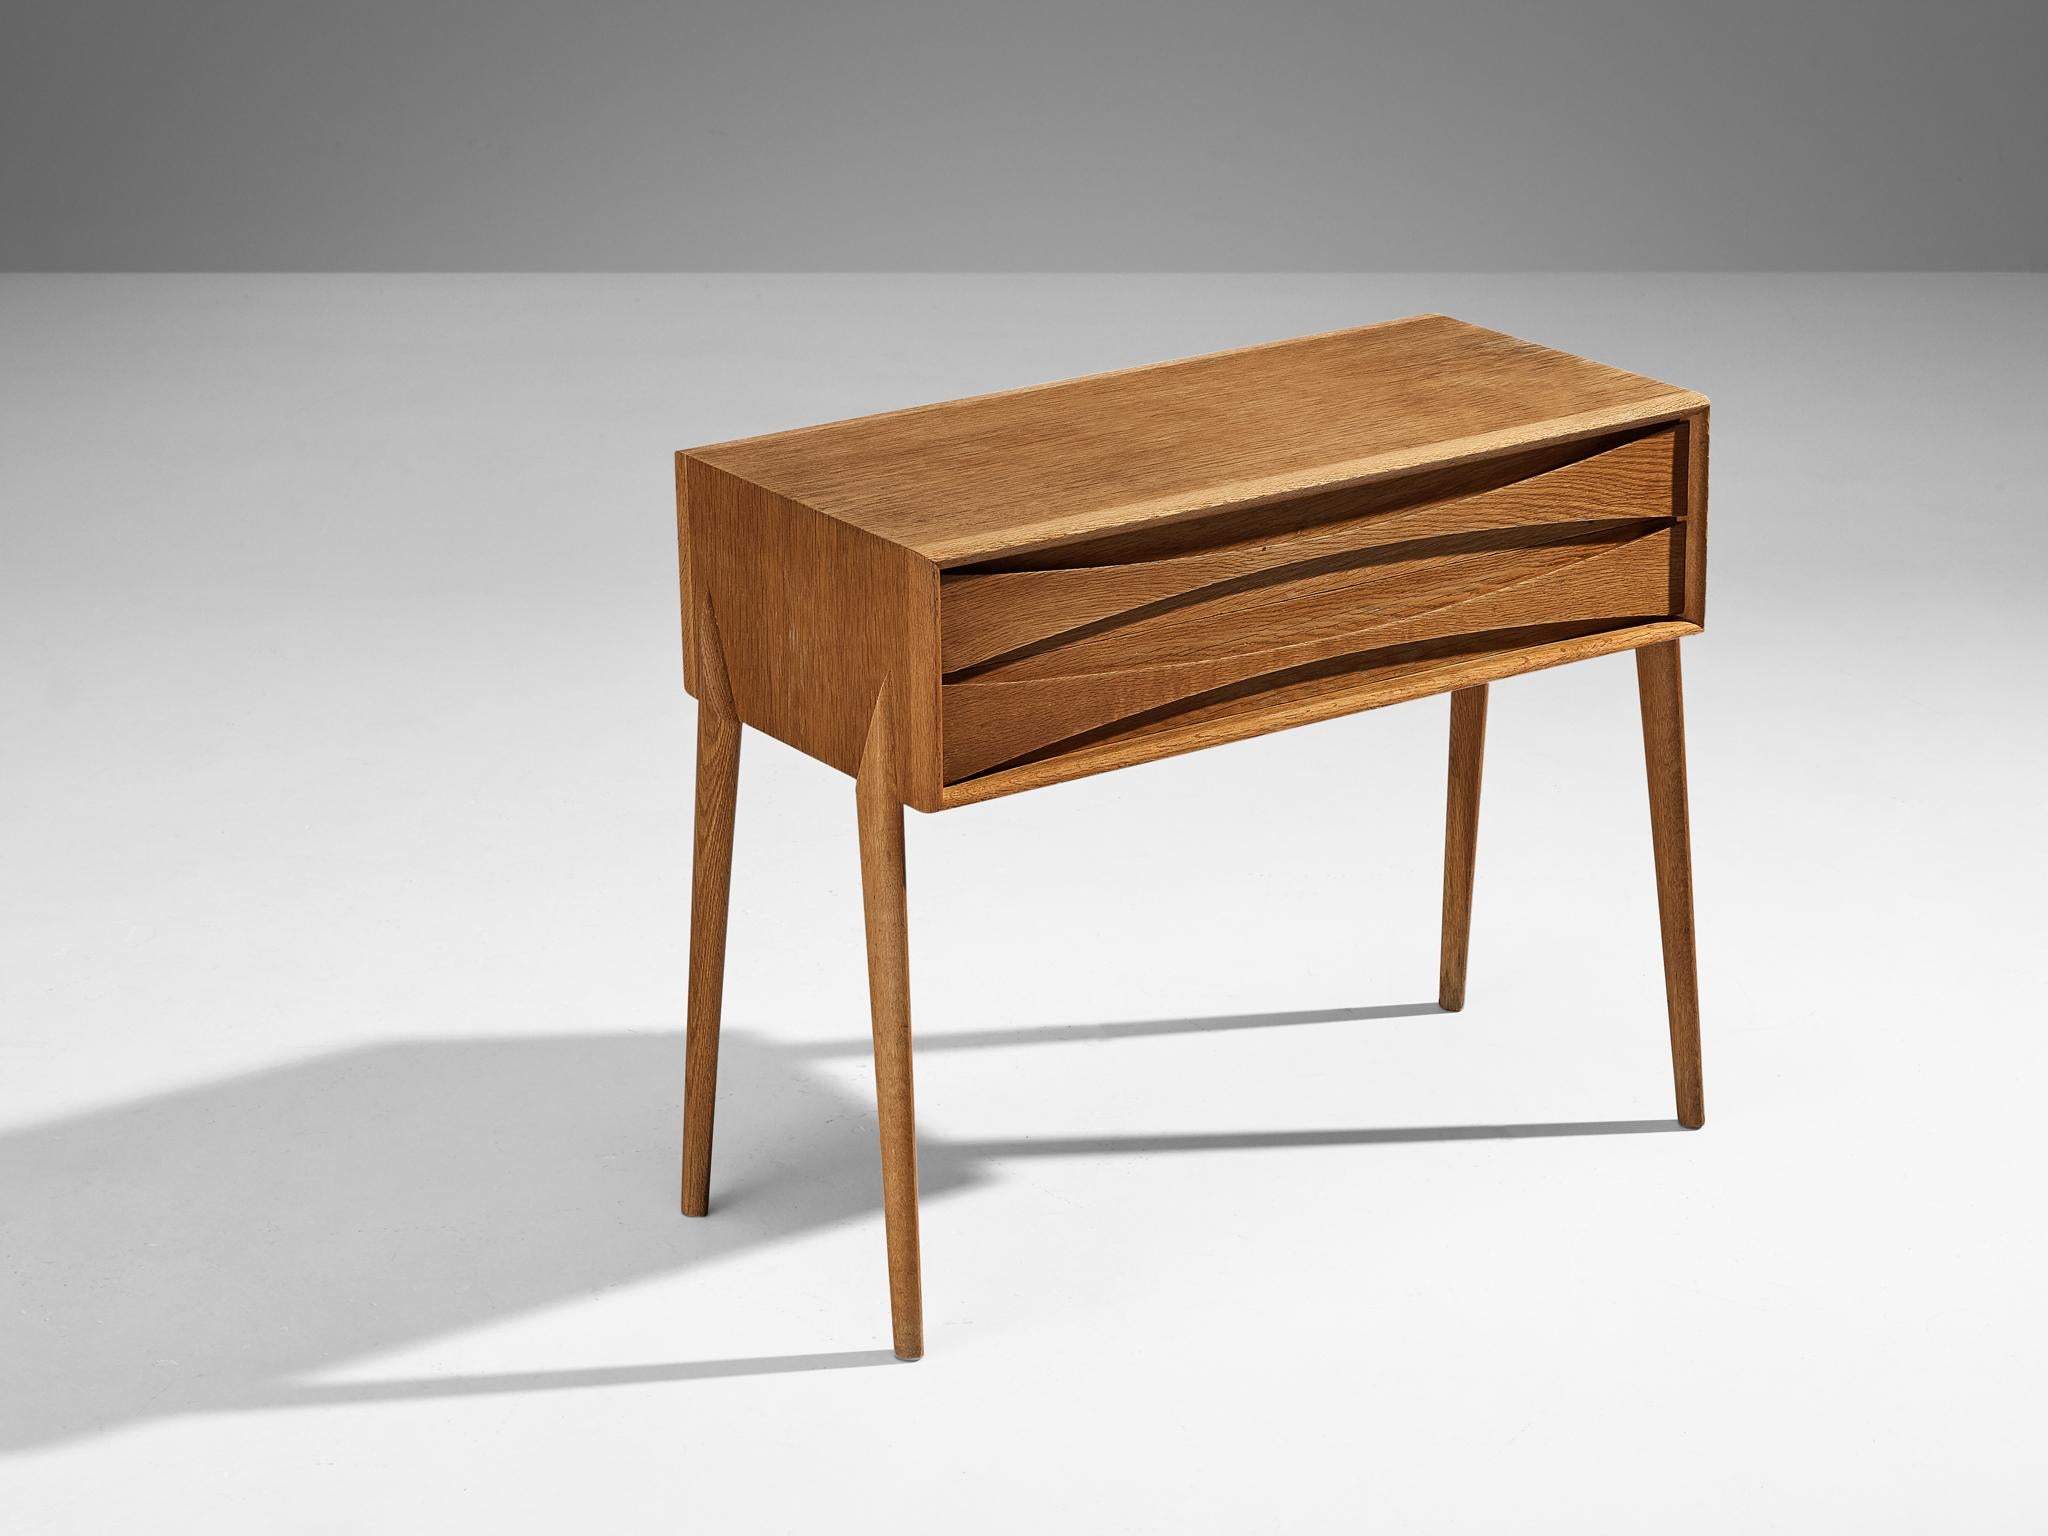 Rimbert Sandholt for Ateljé Glas & Trä, night stand or side table, oak, Sweden, 1960s

This charming nightstand or side table is designed by the Swedish designer Rimbert Sandholt. This piece is well-constructed in a precise manner implementing